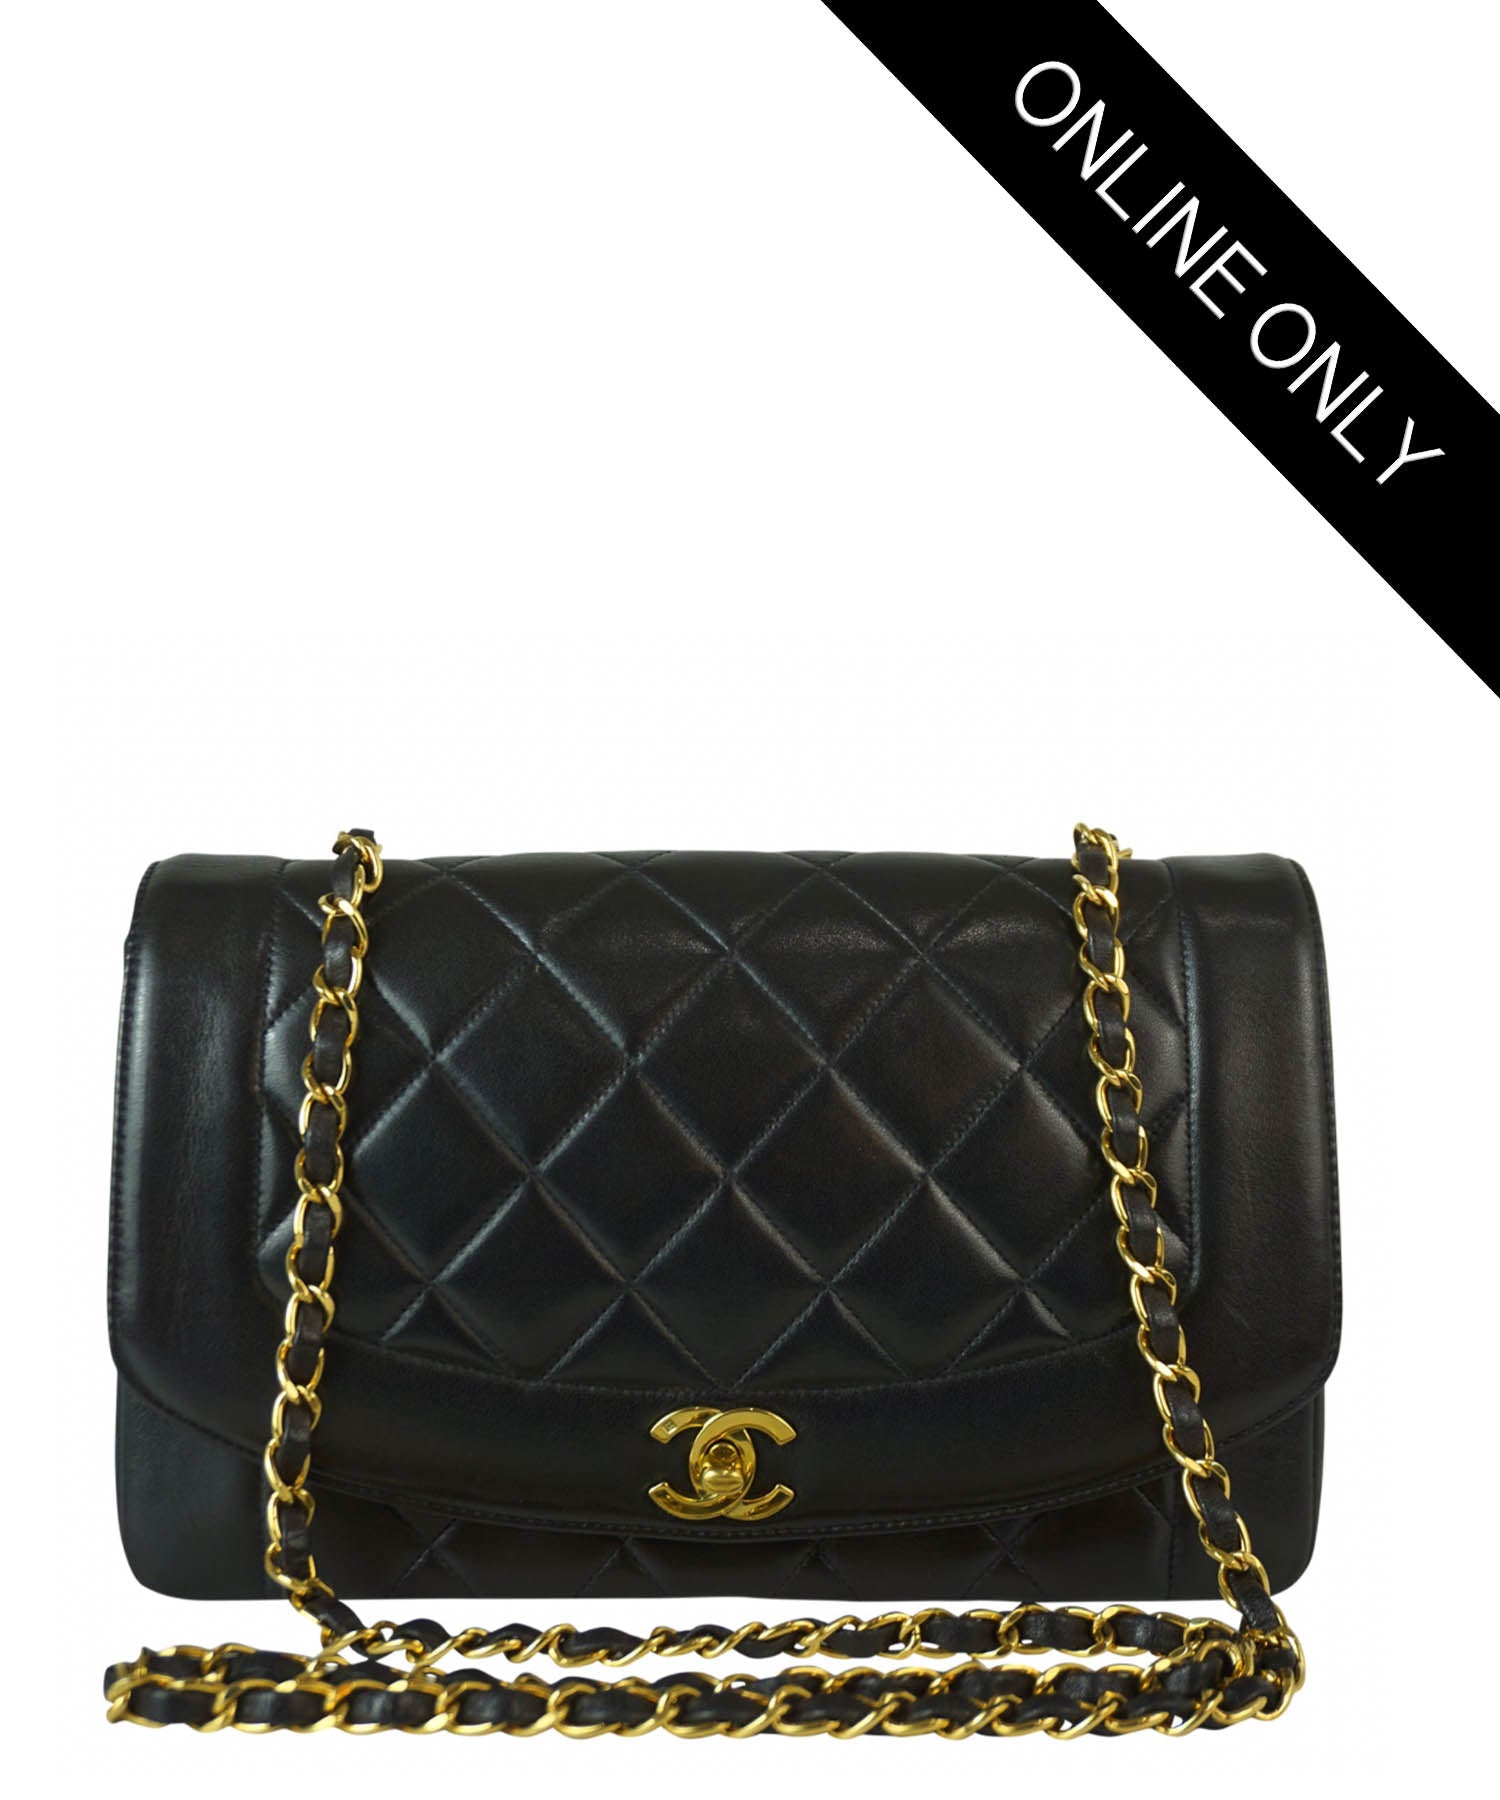 Chanel Black Quilted Leather Fold Over Clutch Chanel